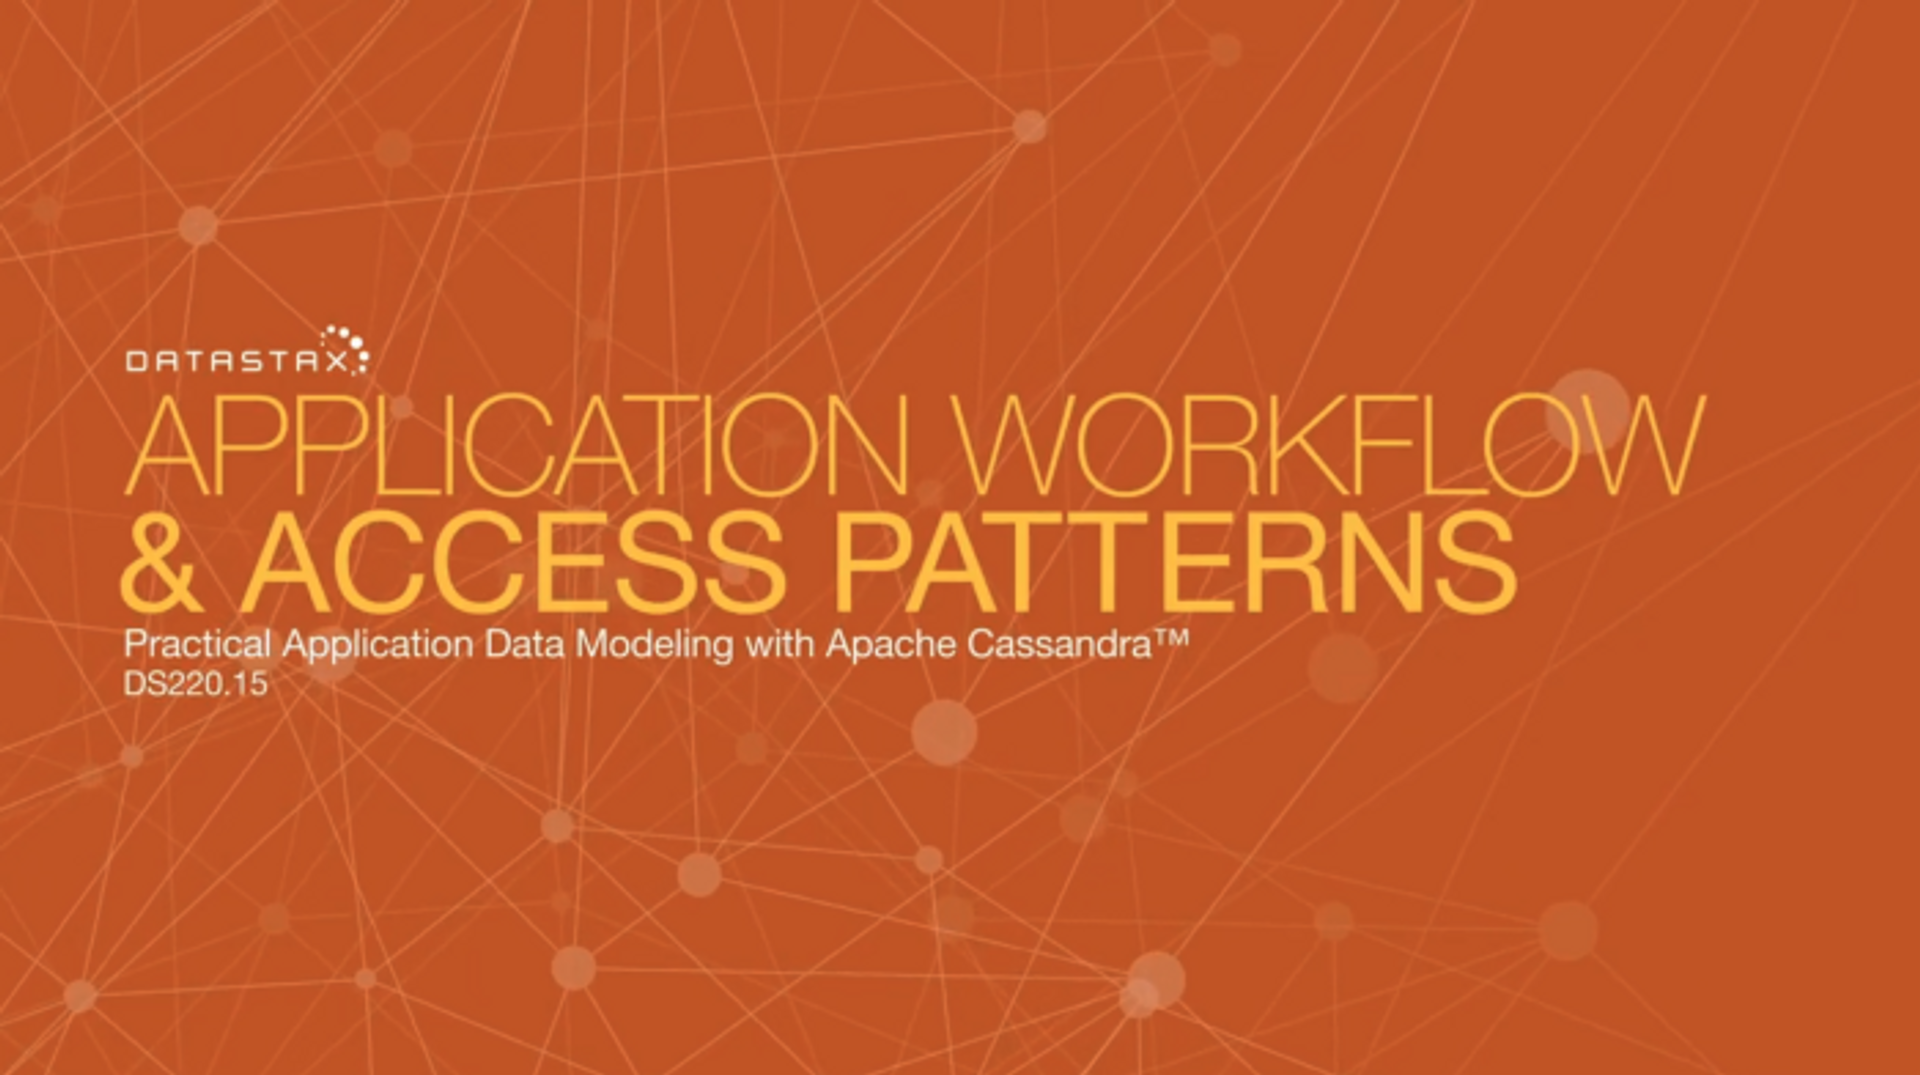 Application Workflow & Access Patterns